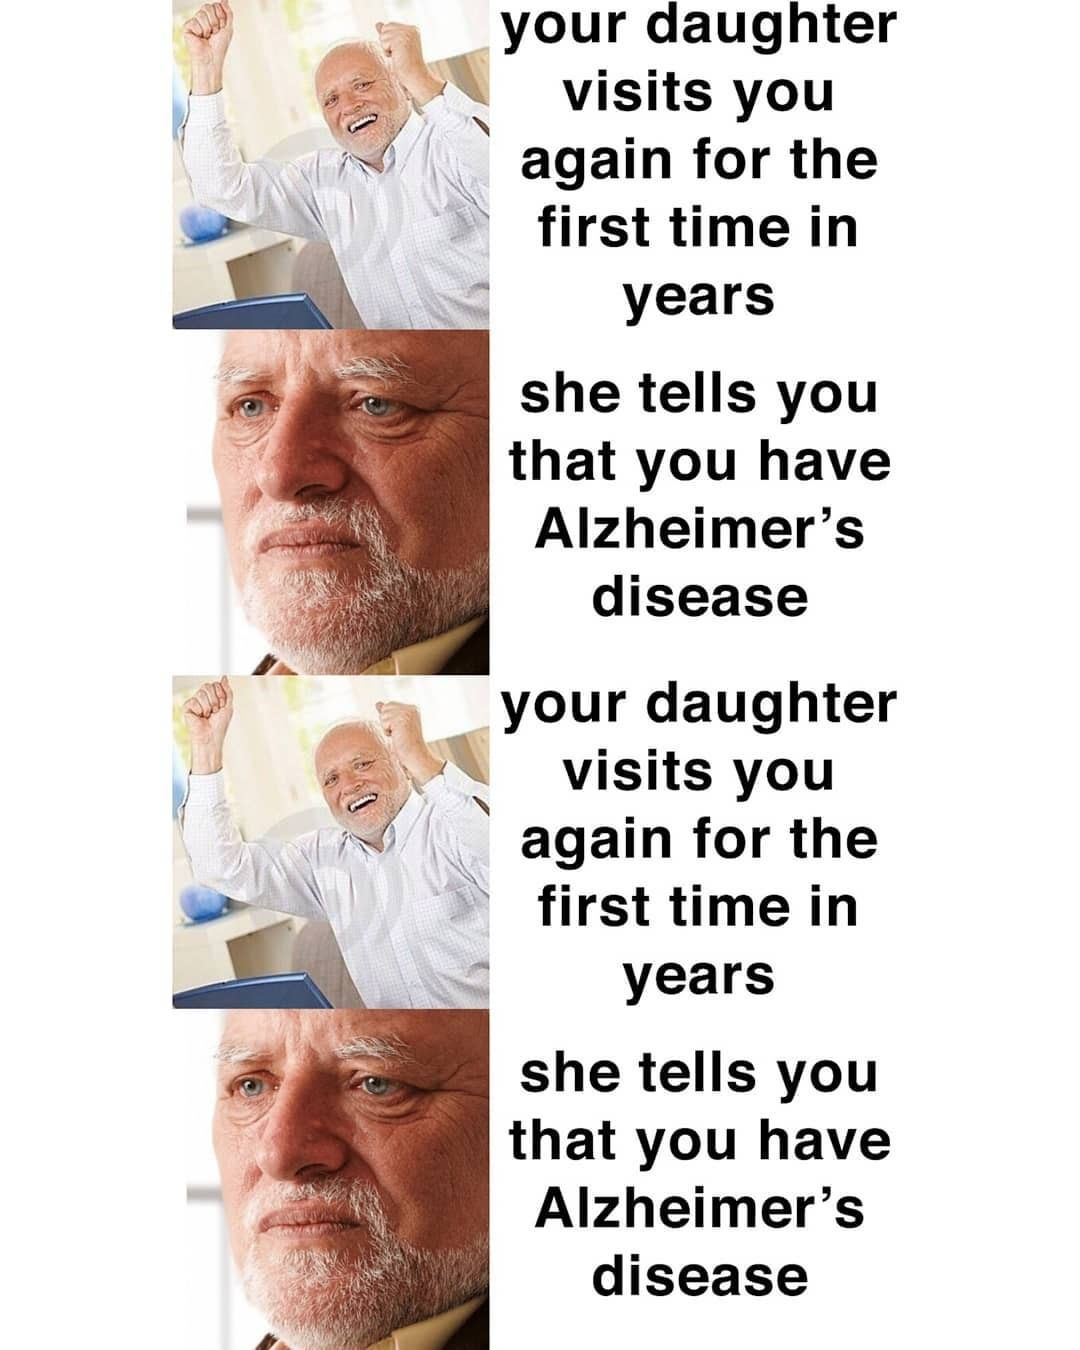 Your daughter visits you again for the first time in years.  She tells you that you have Alzheimer's disease.  Your daughter visits you again for the first time in years.  She tells you that you have Alzheimer's disease.